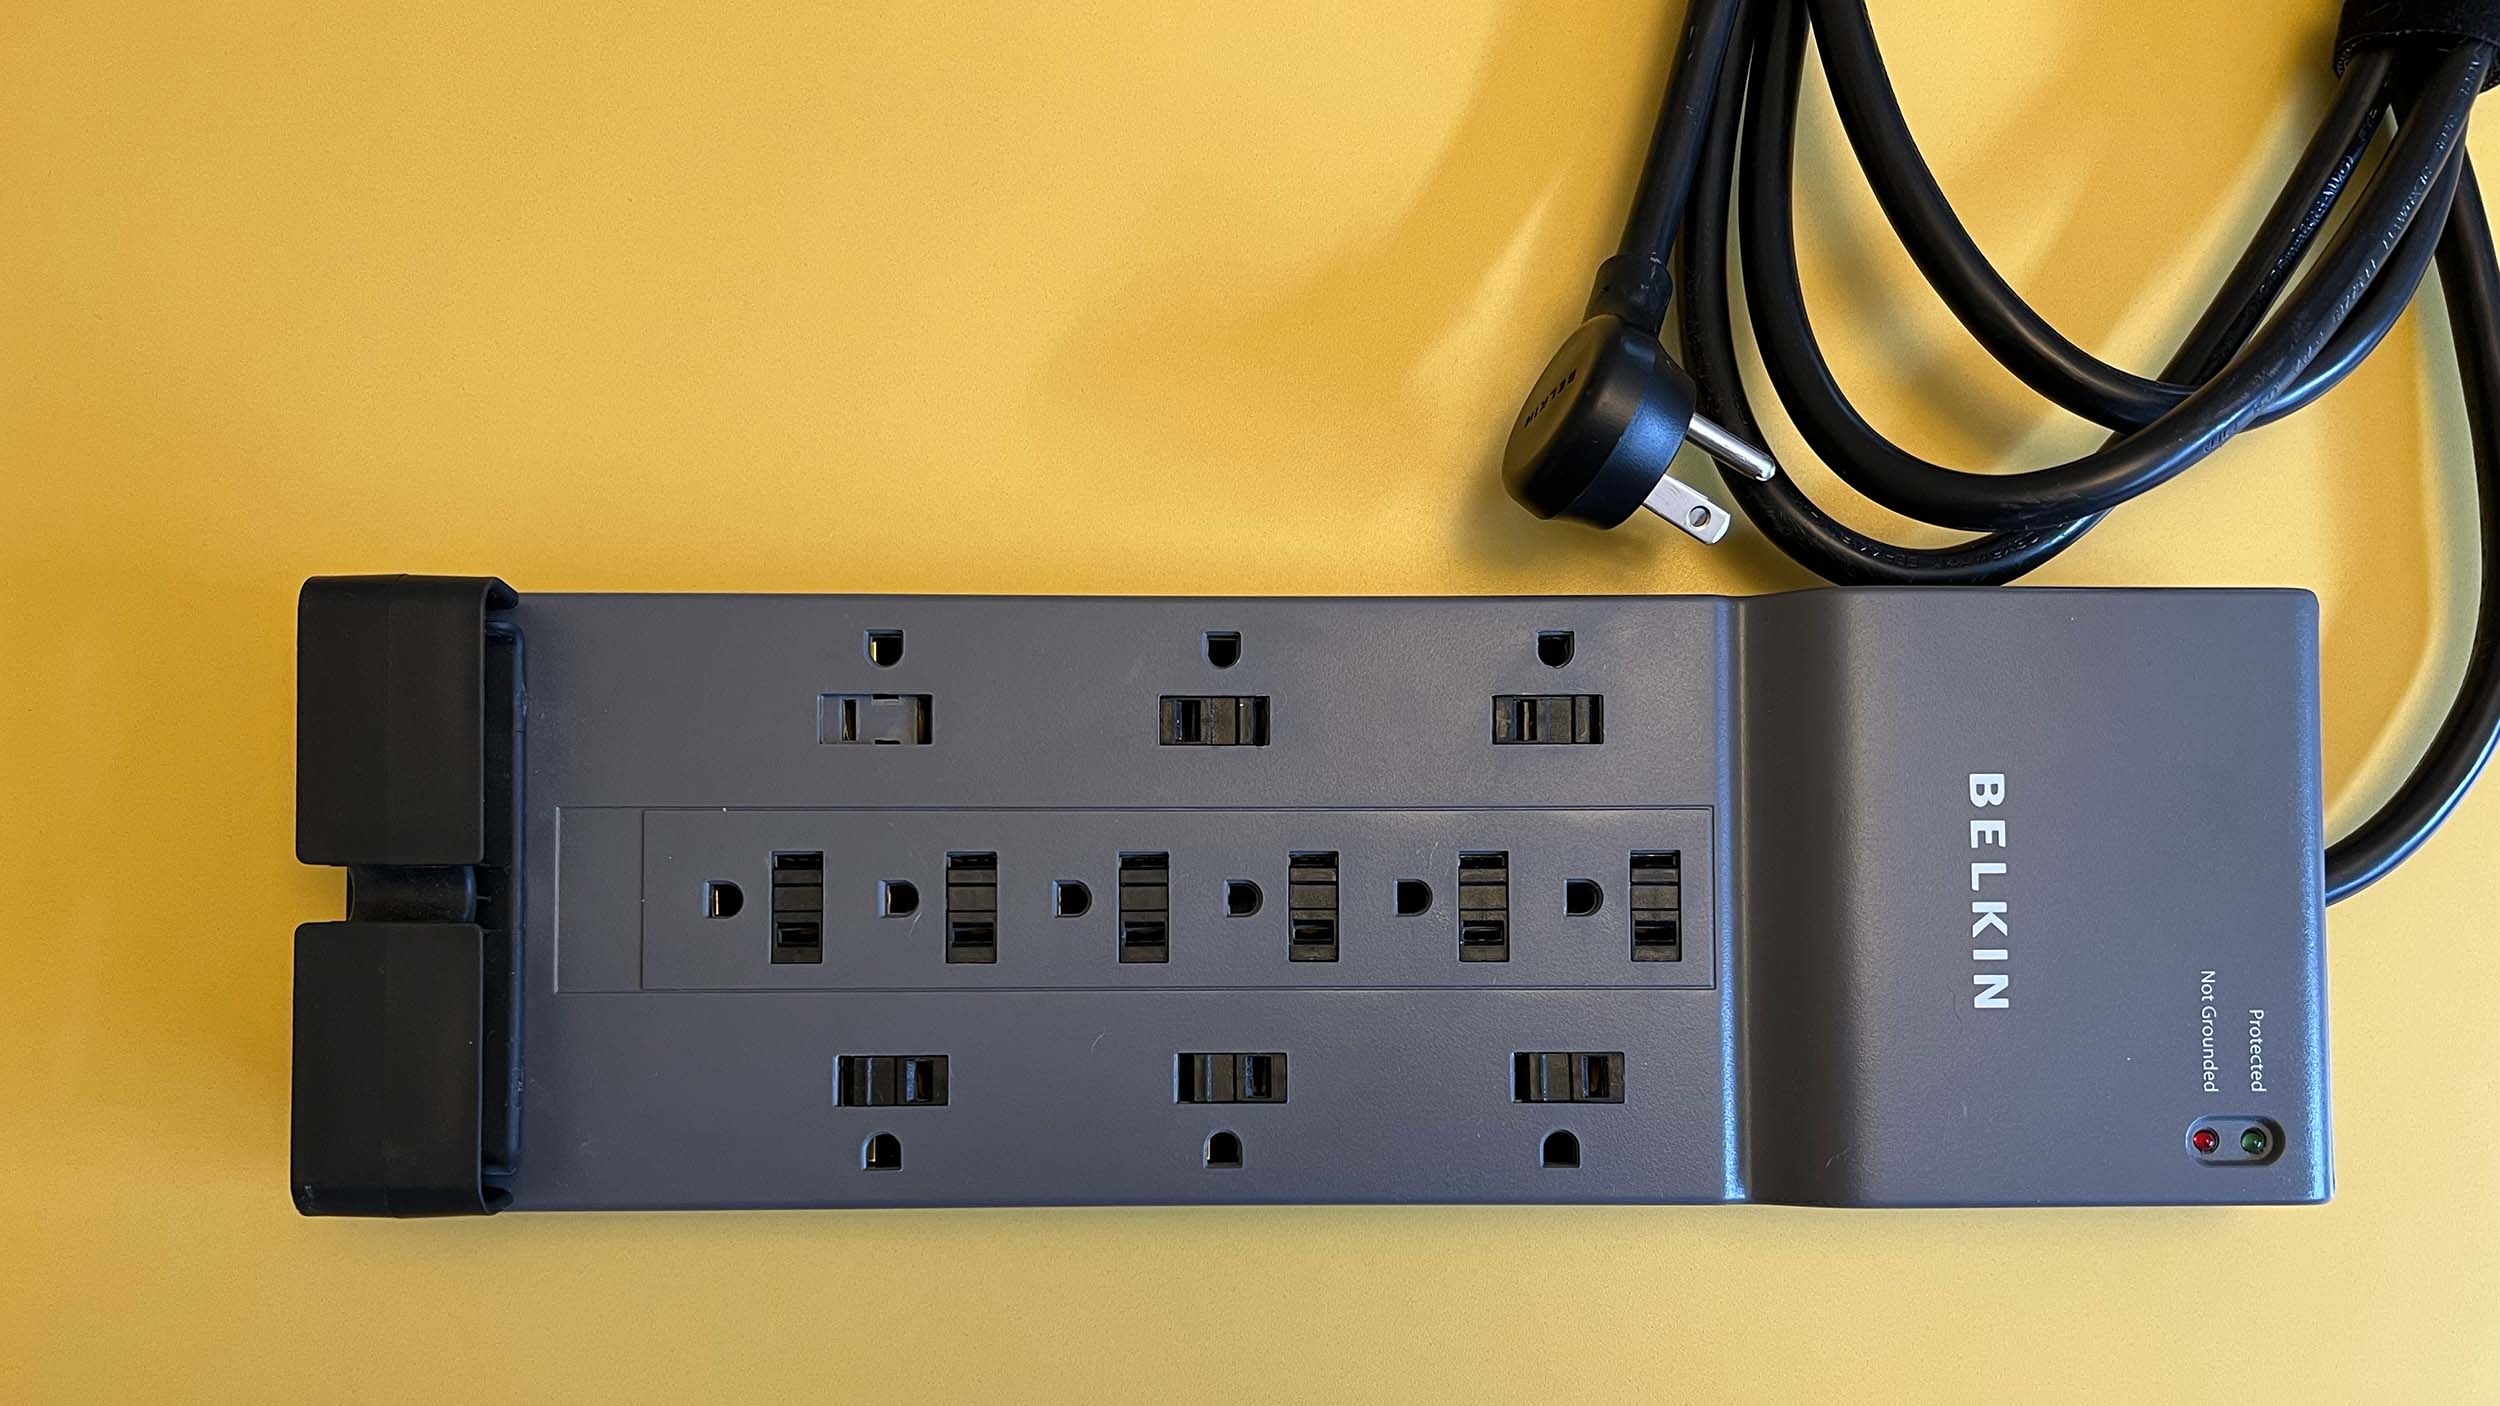 Electronic Surge Protector - Protect Your Small Appliances